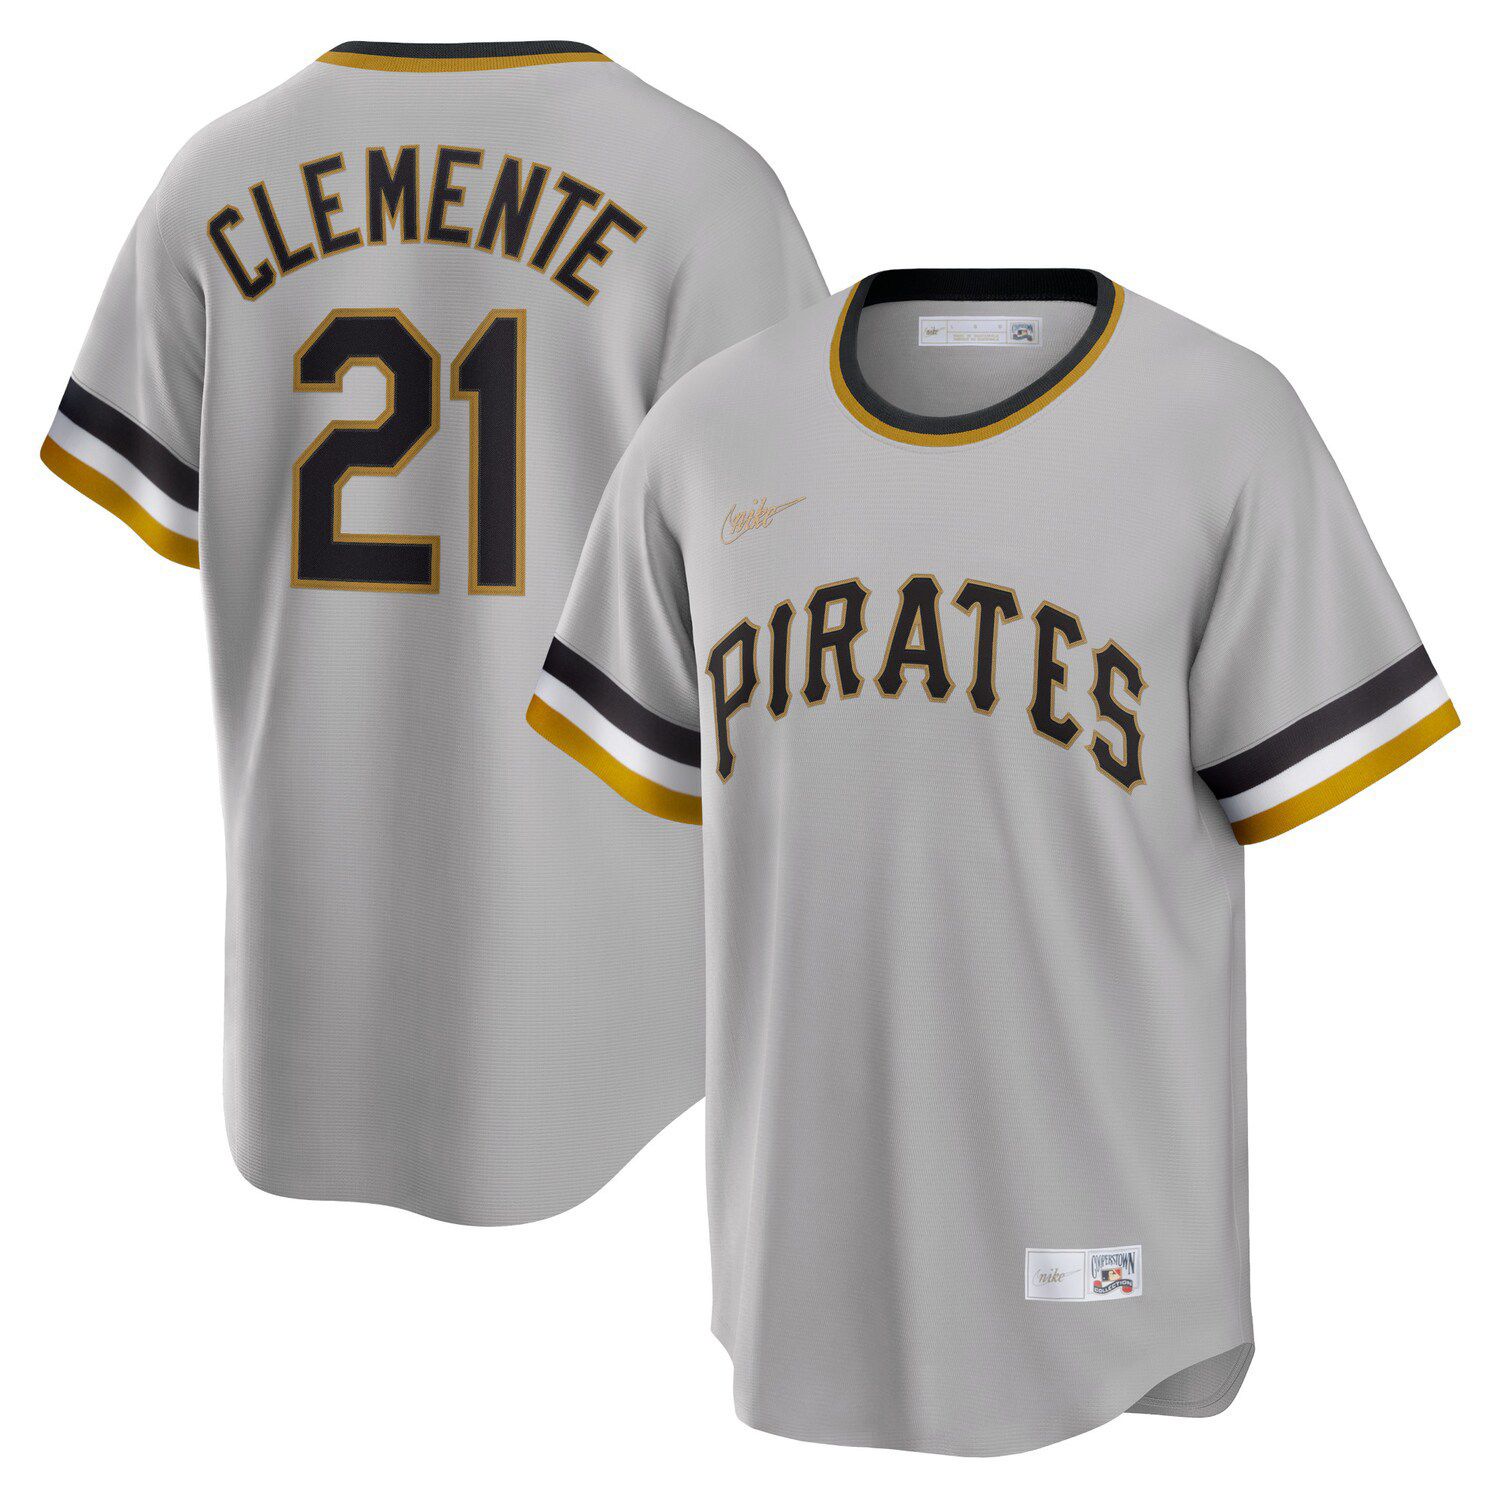 roberto clemente signed jersey